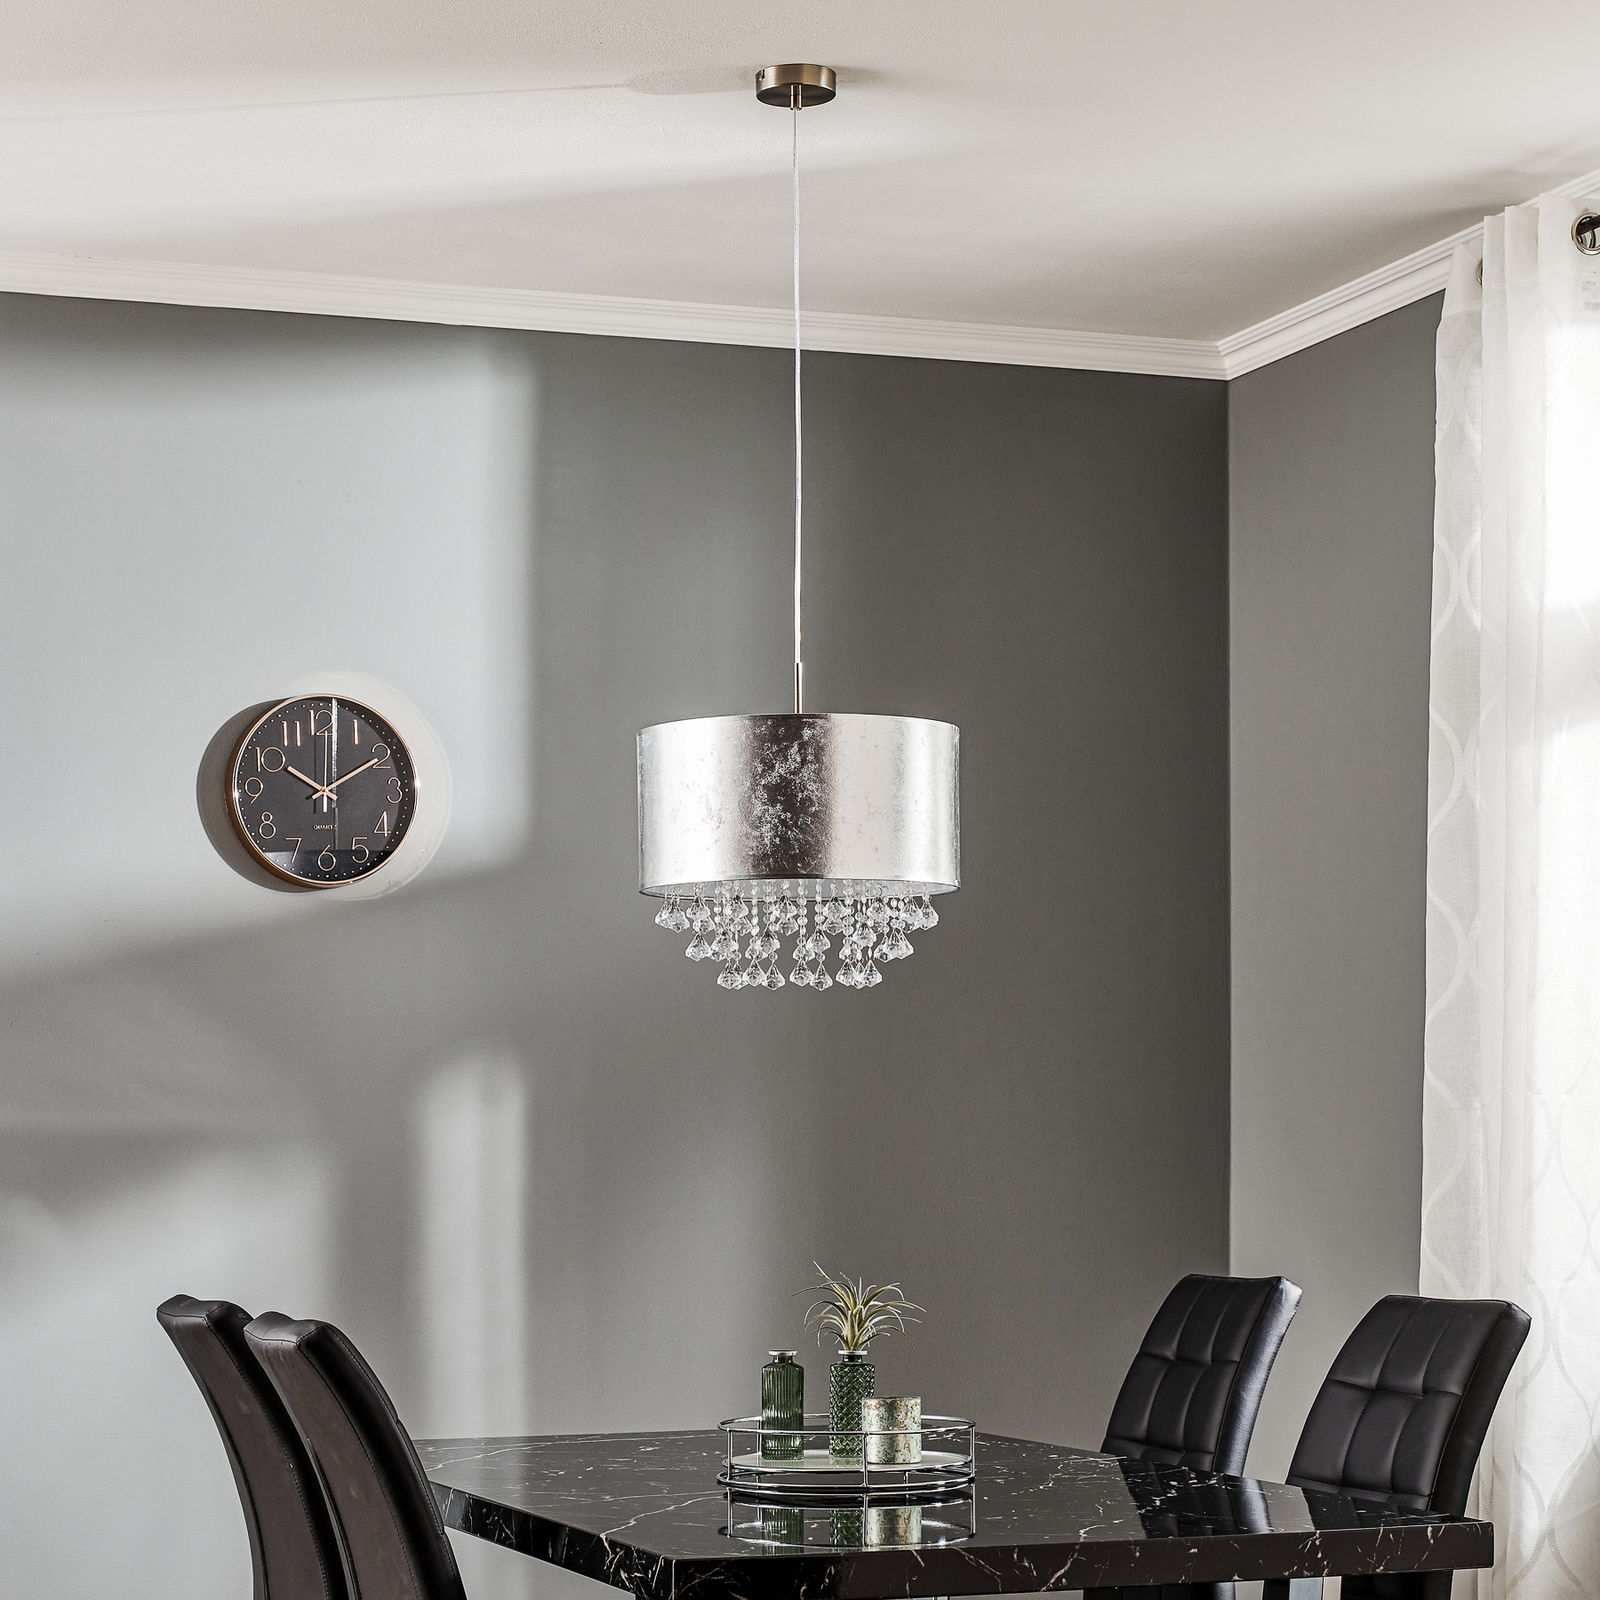 Amy - silver fabric hanging light hanging elements